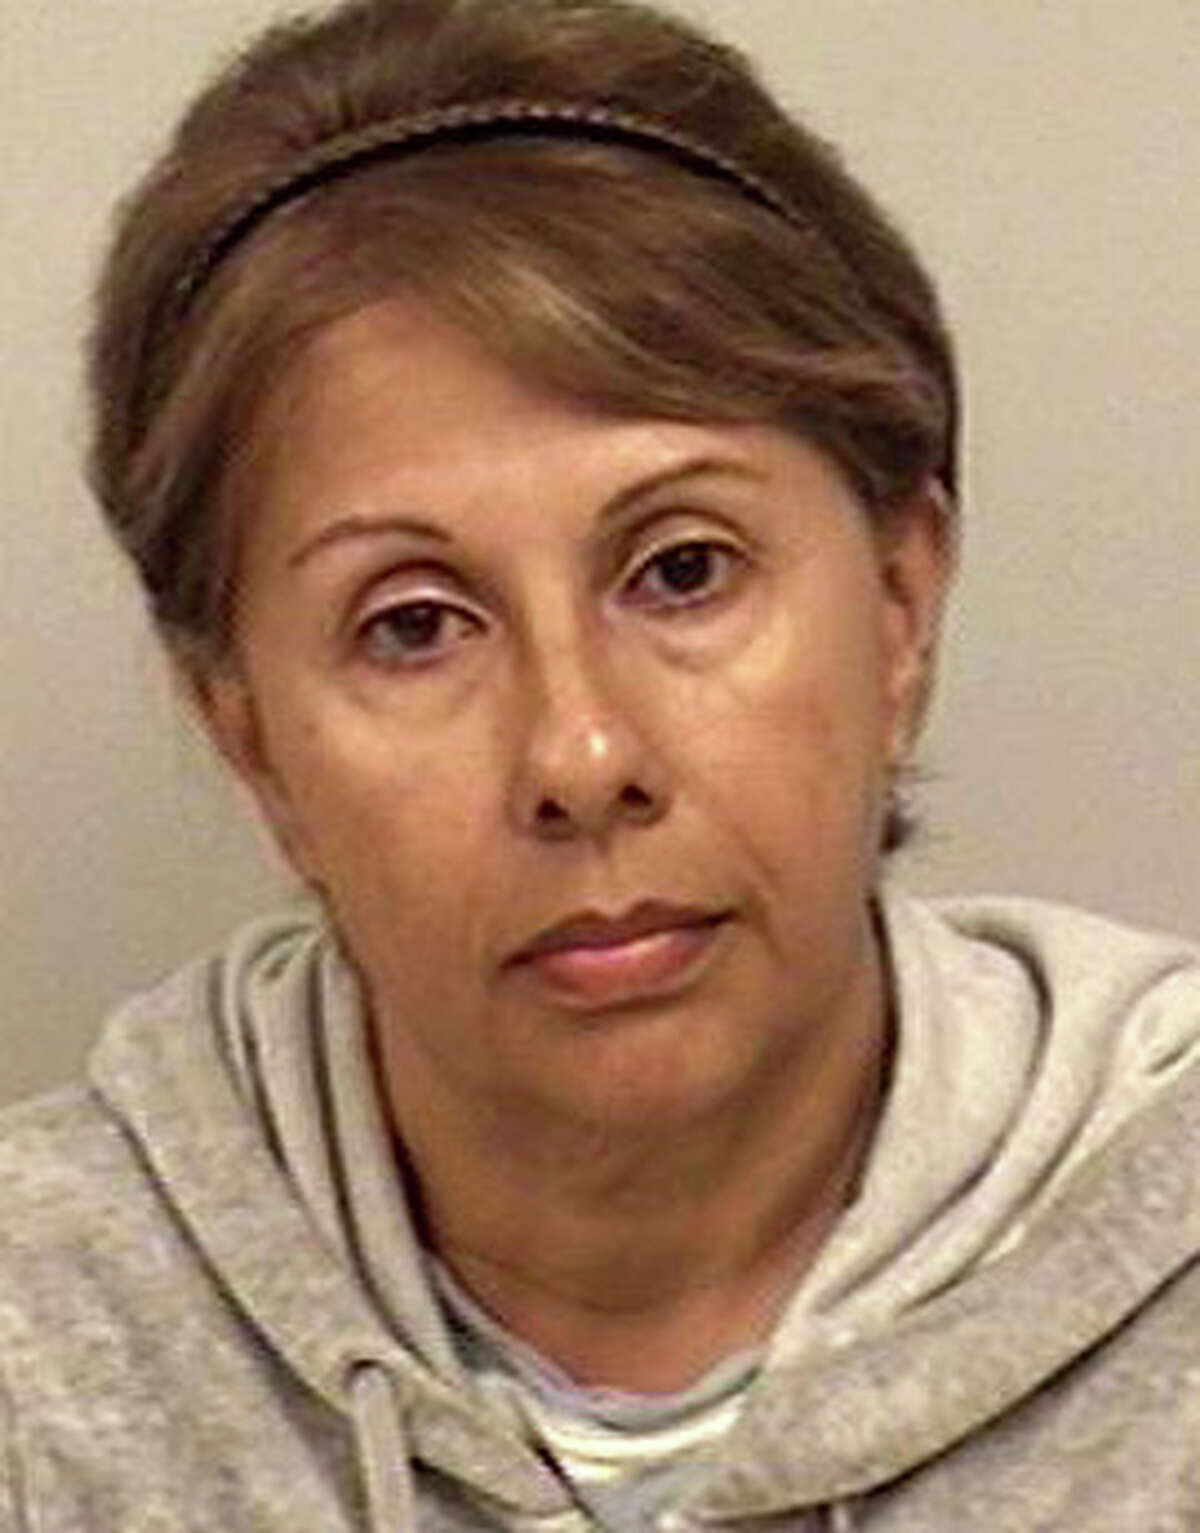 Cops Housekeeper stole $384K in jewelry from Westport home pic